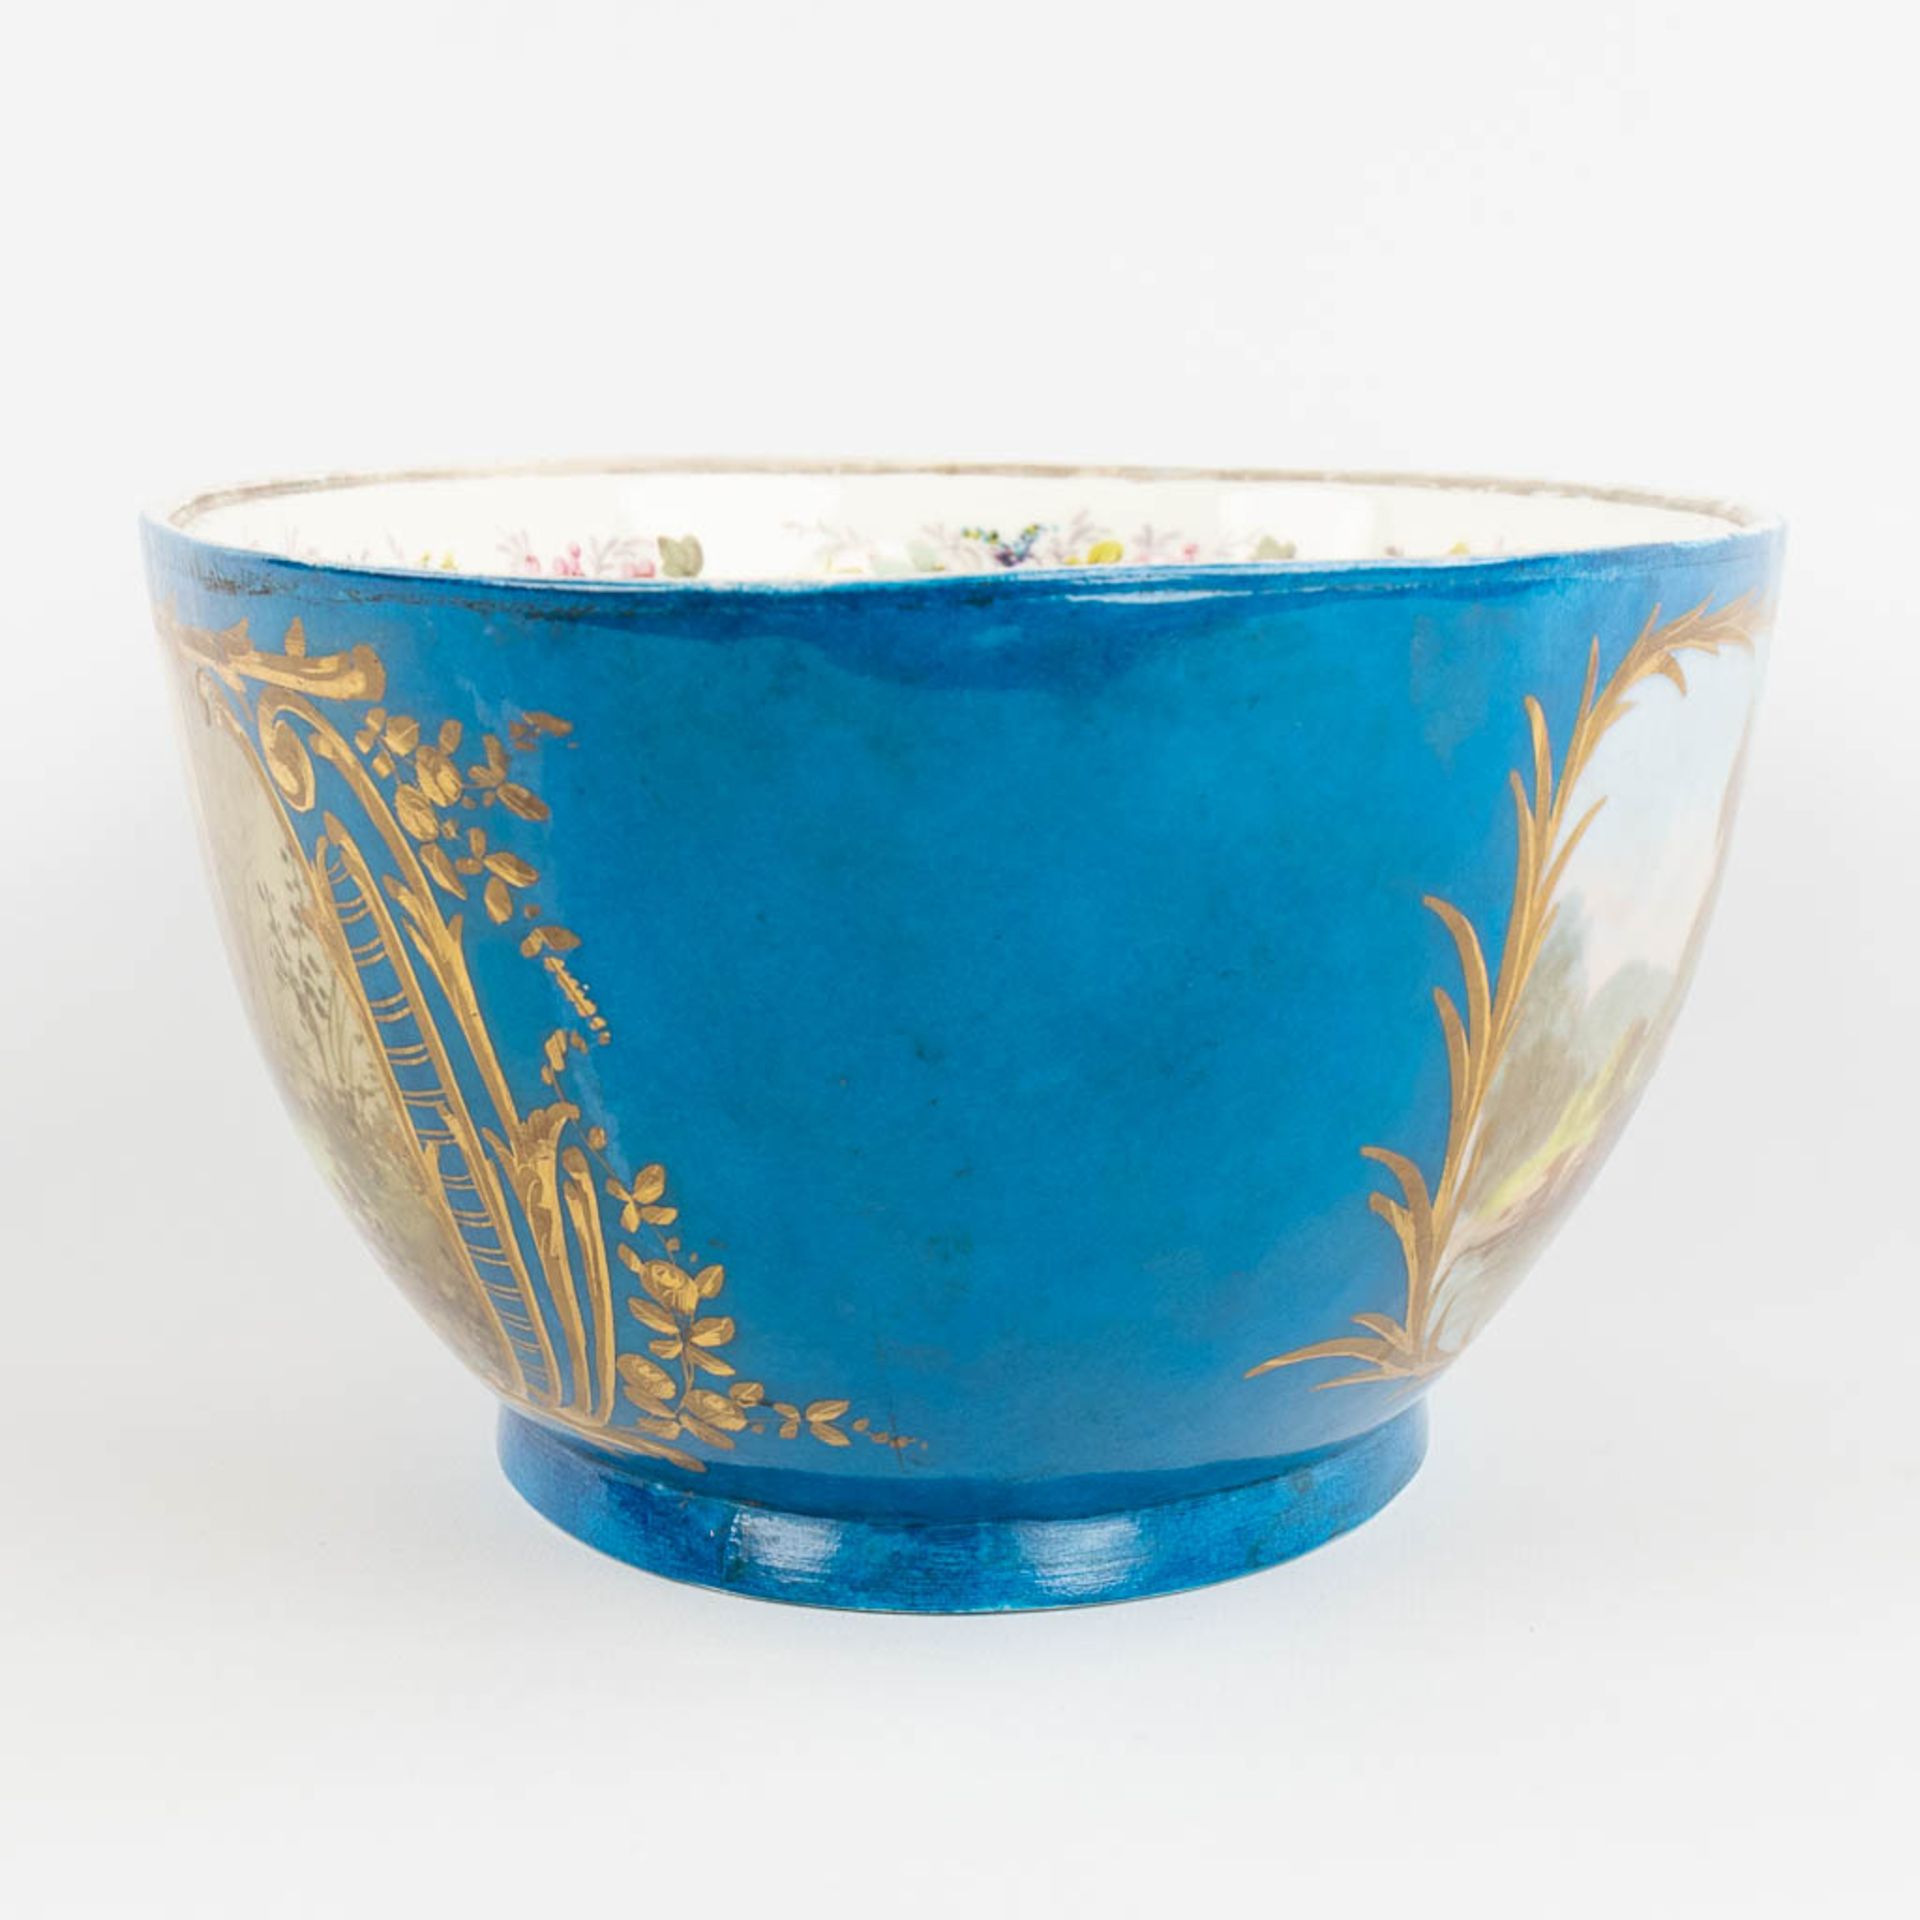 A large bowl, blue glaze with hand-painted decor, probably Limoges. (L:24 x W:39 x H:14 cm) - Image 6 of 12